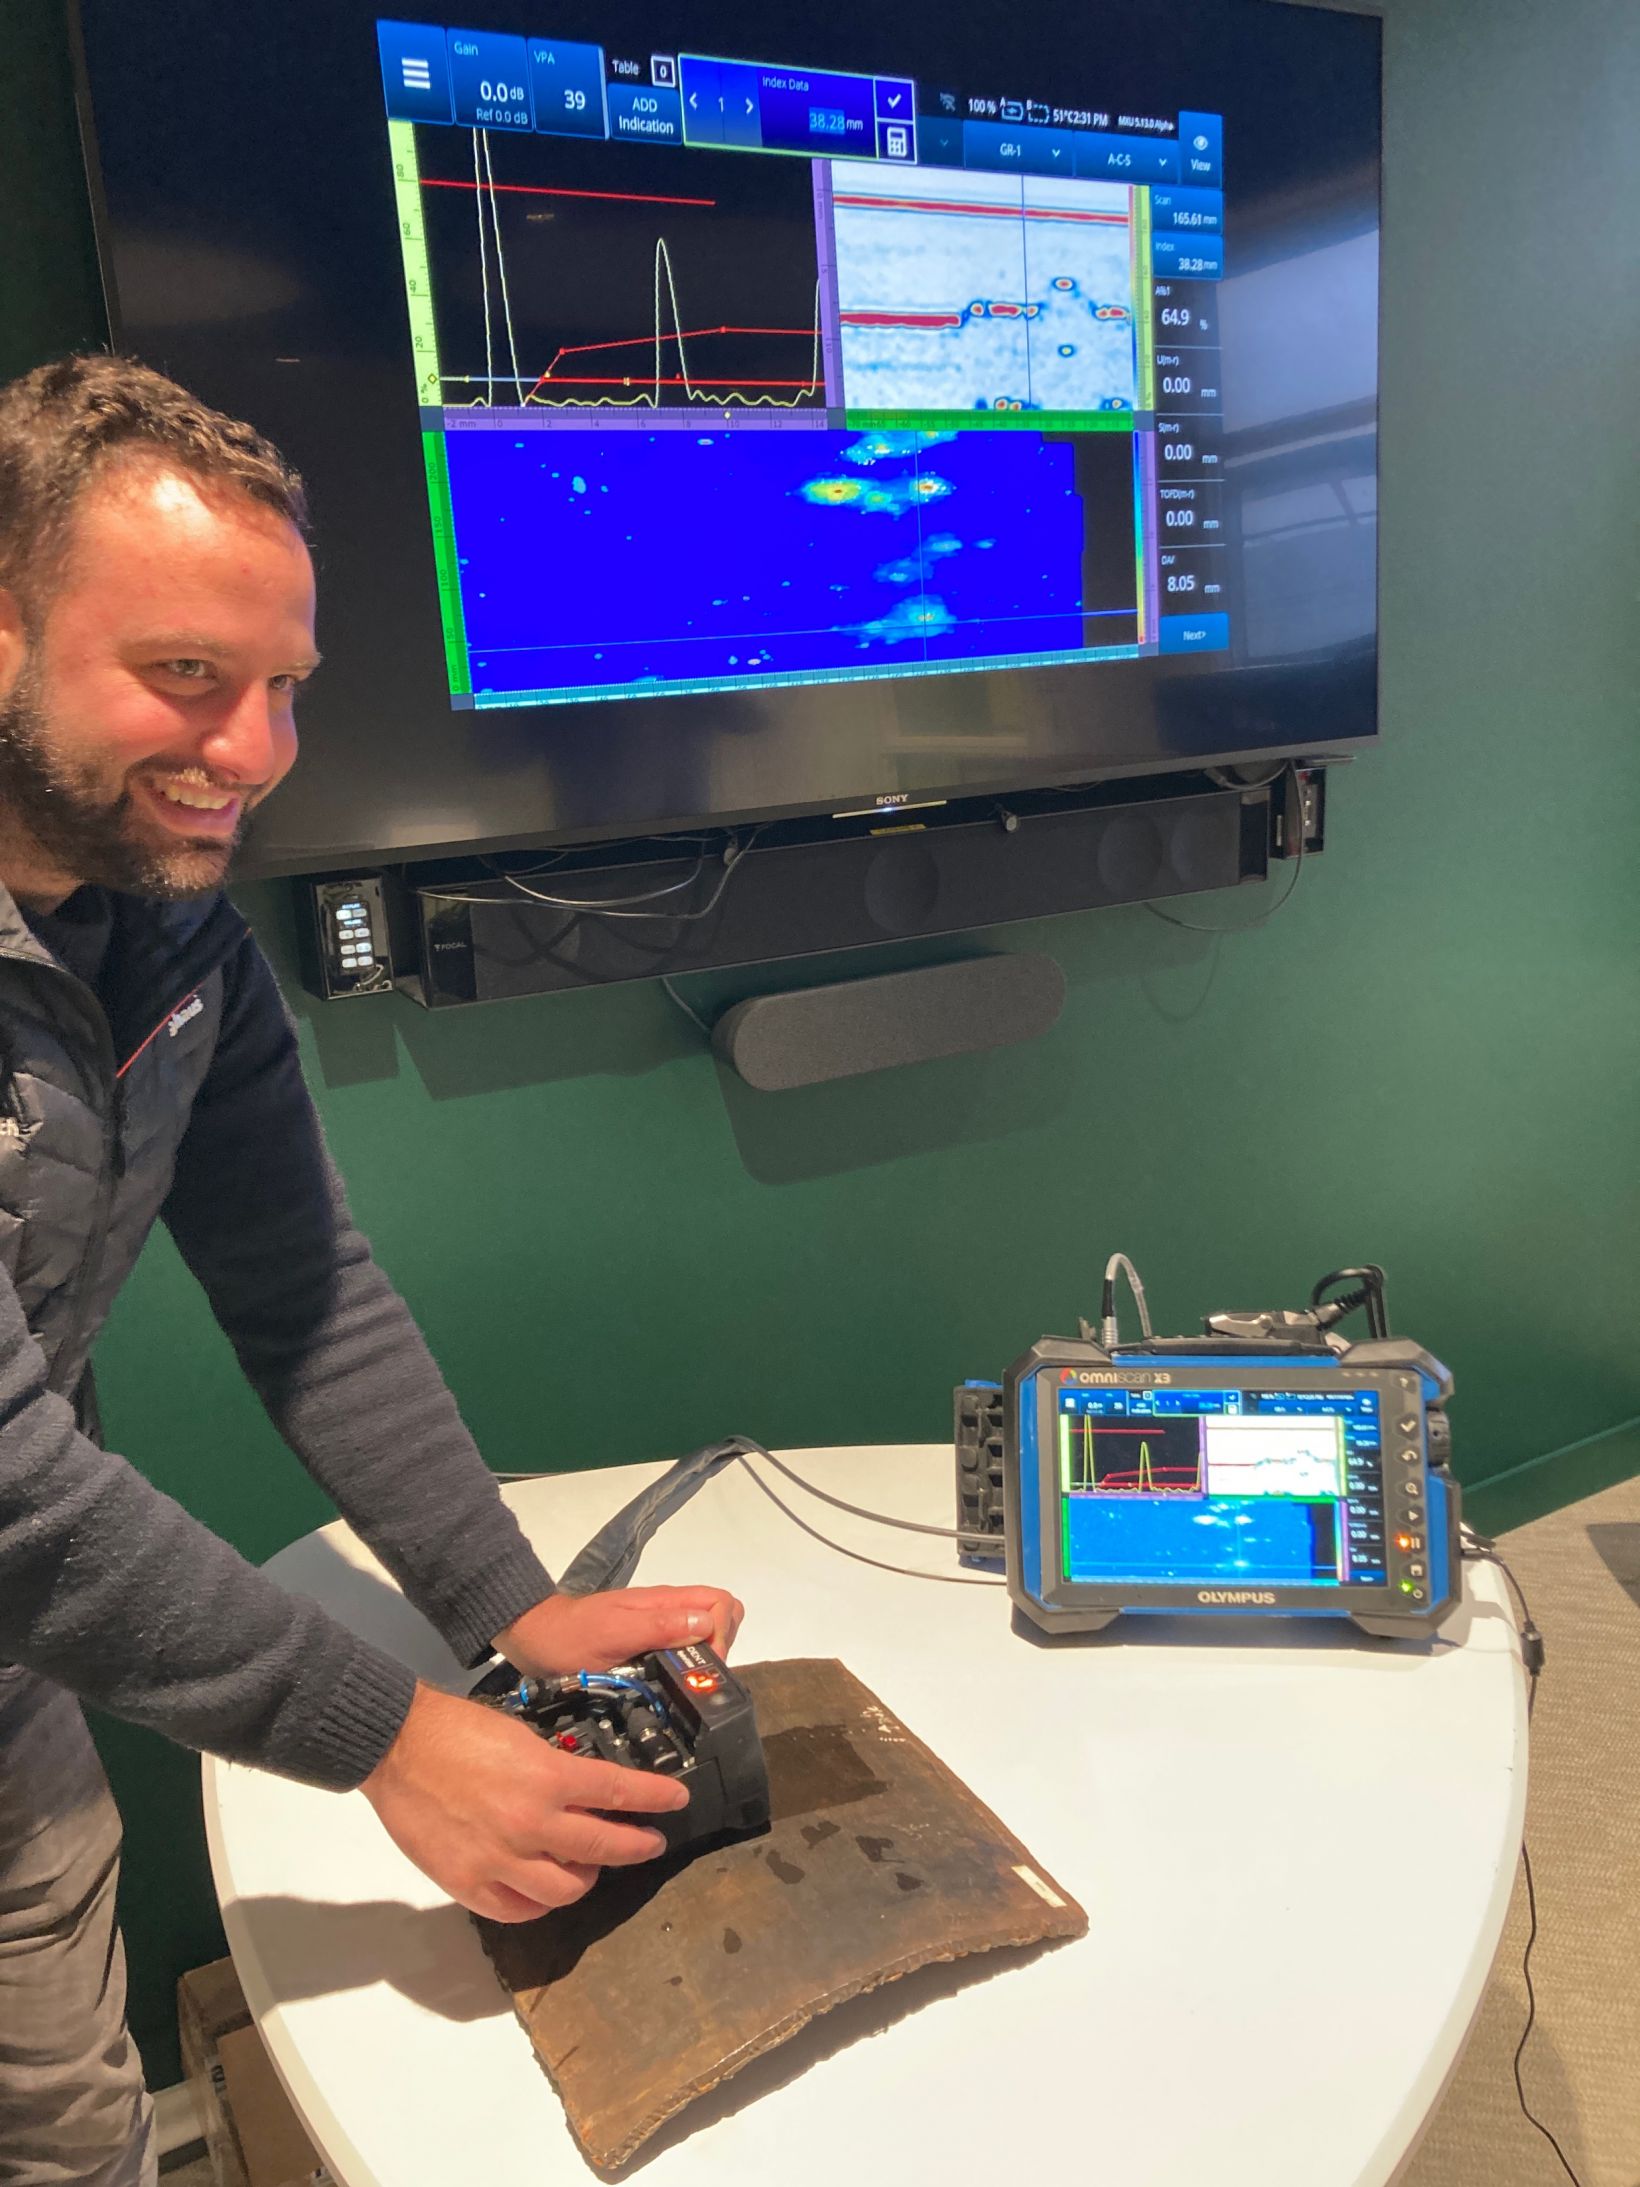 Testing the HydroFORM scanner with phased array probe on a curved metal sample using the OmniScan X3 data acquisition device